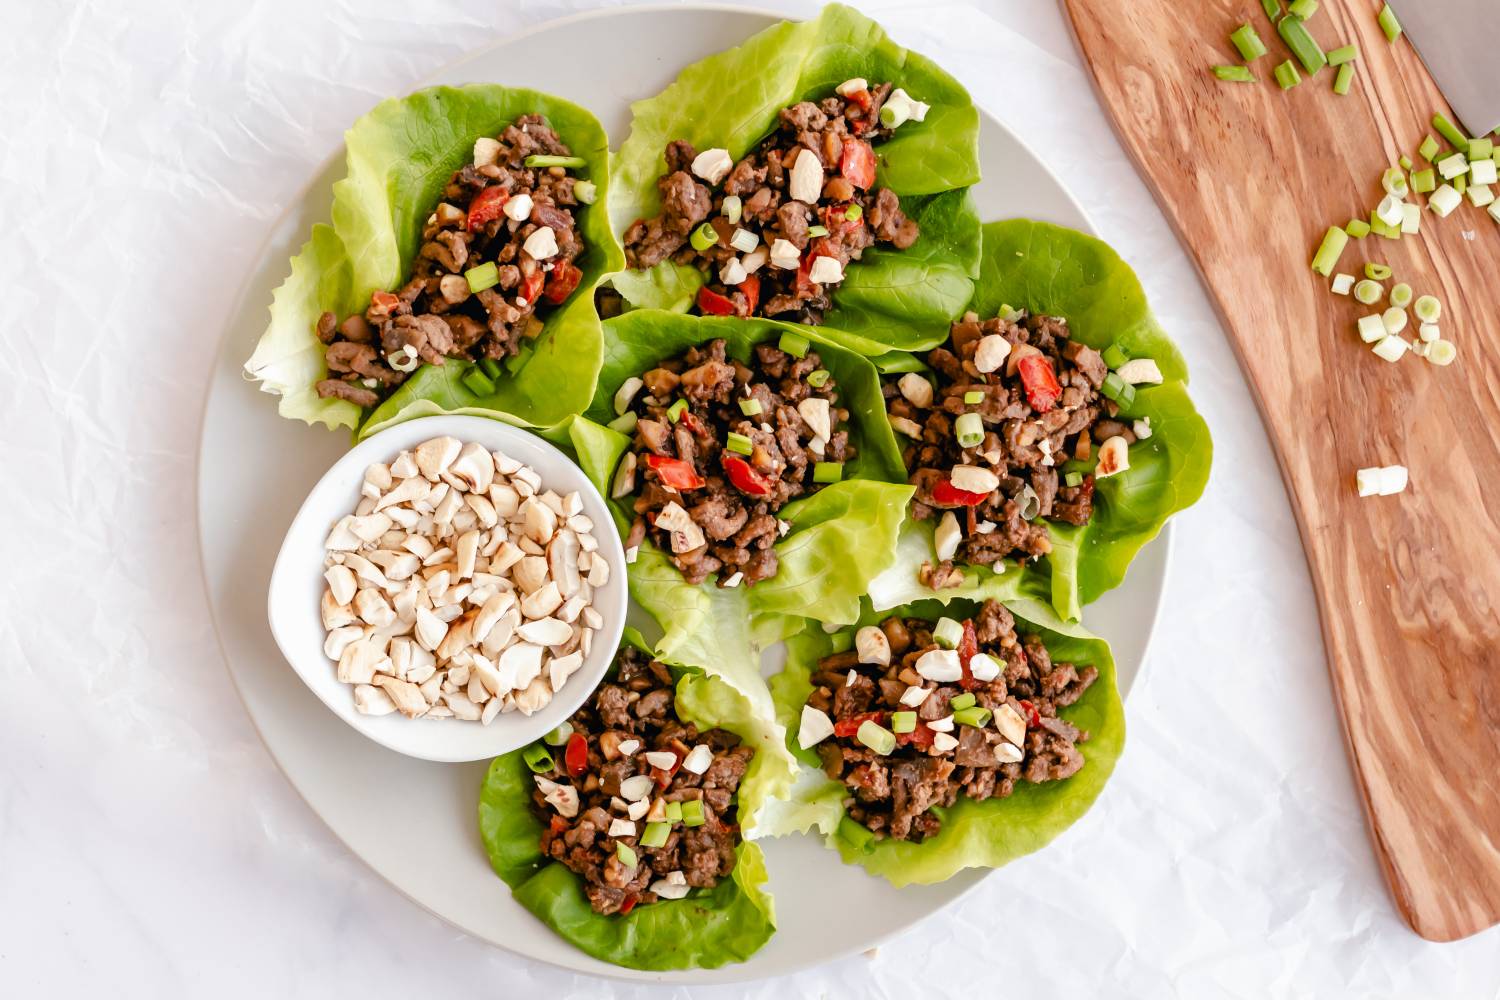 Asian ground beef lettuce wraps with bell peppers, peanuts, and green onions.